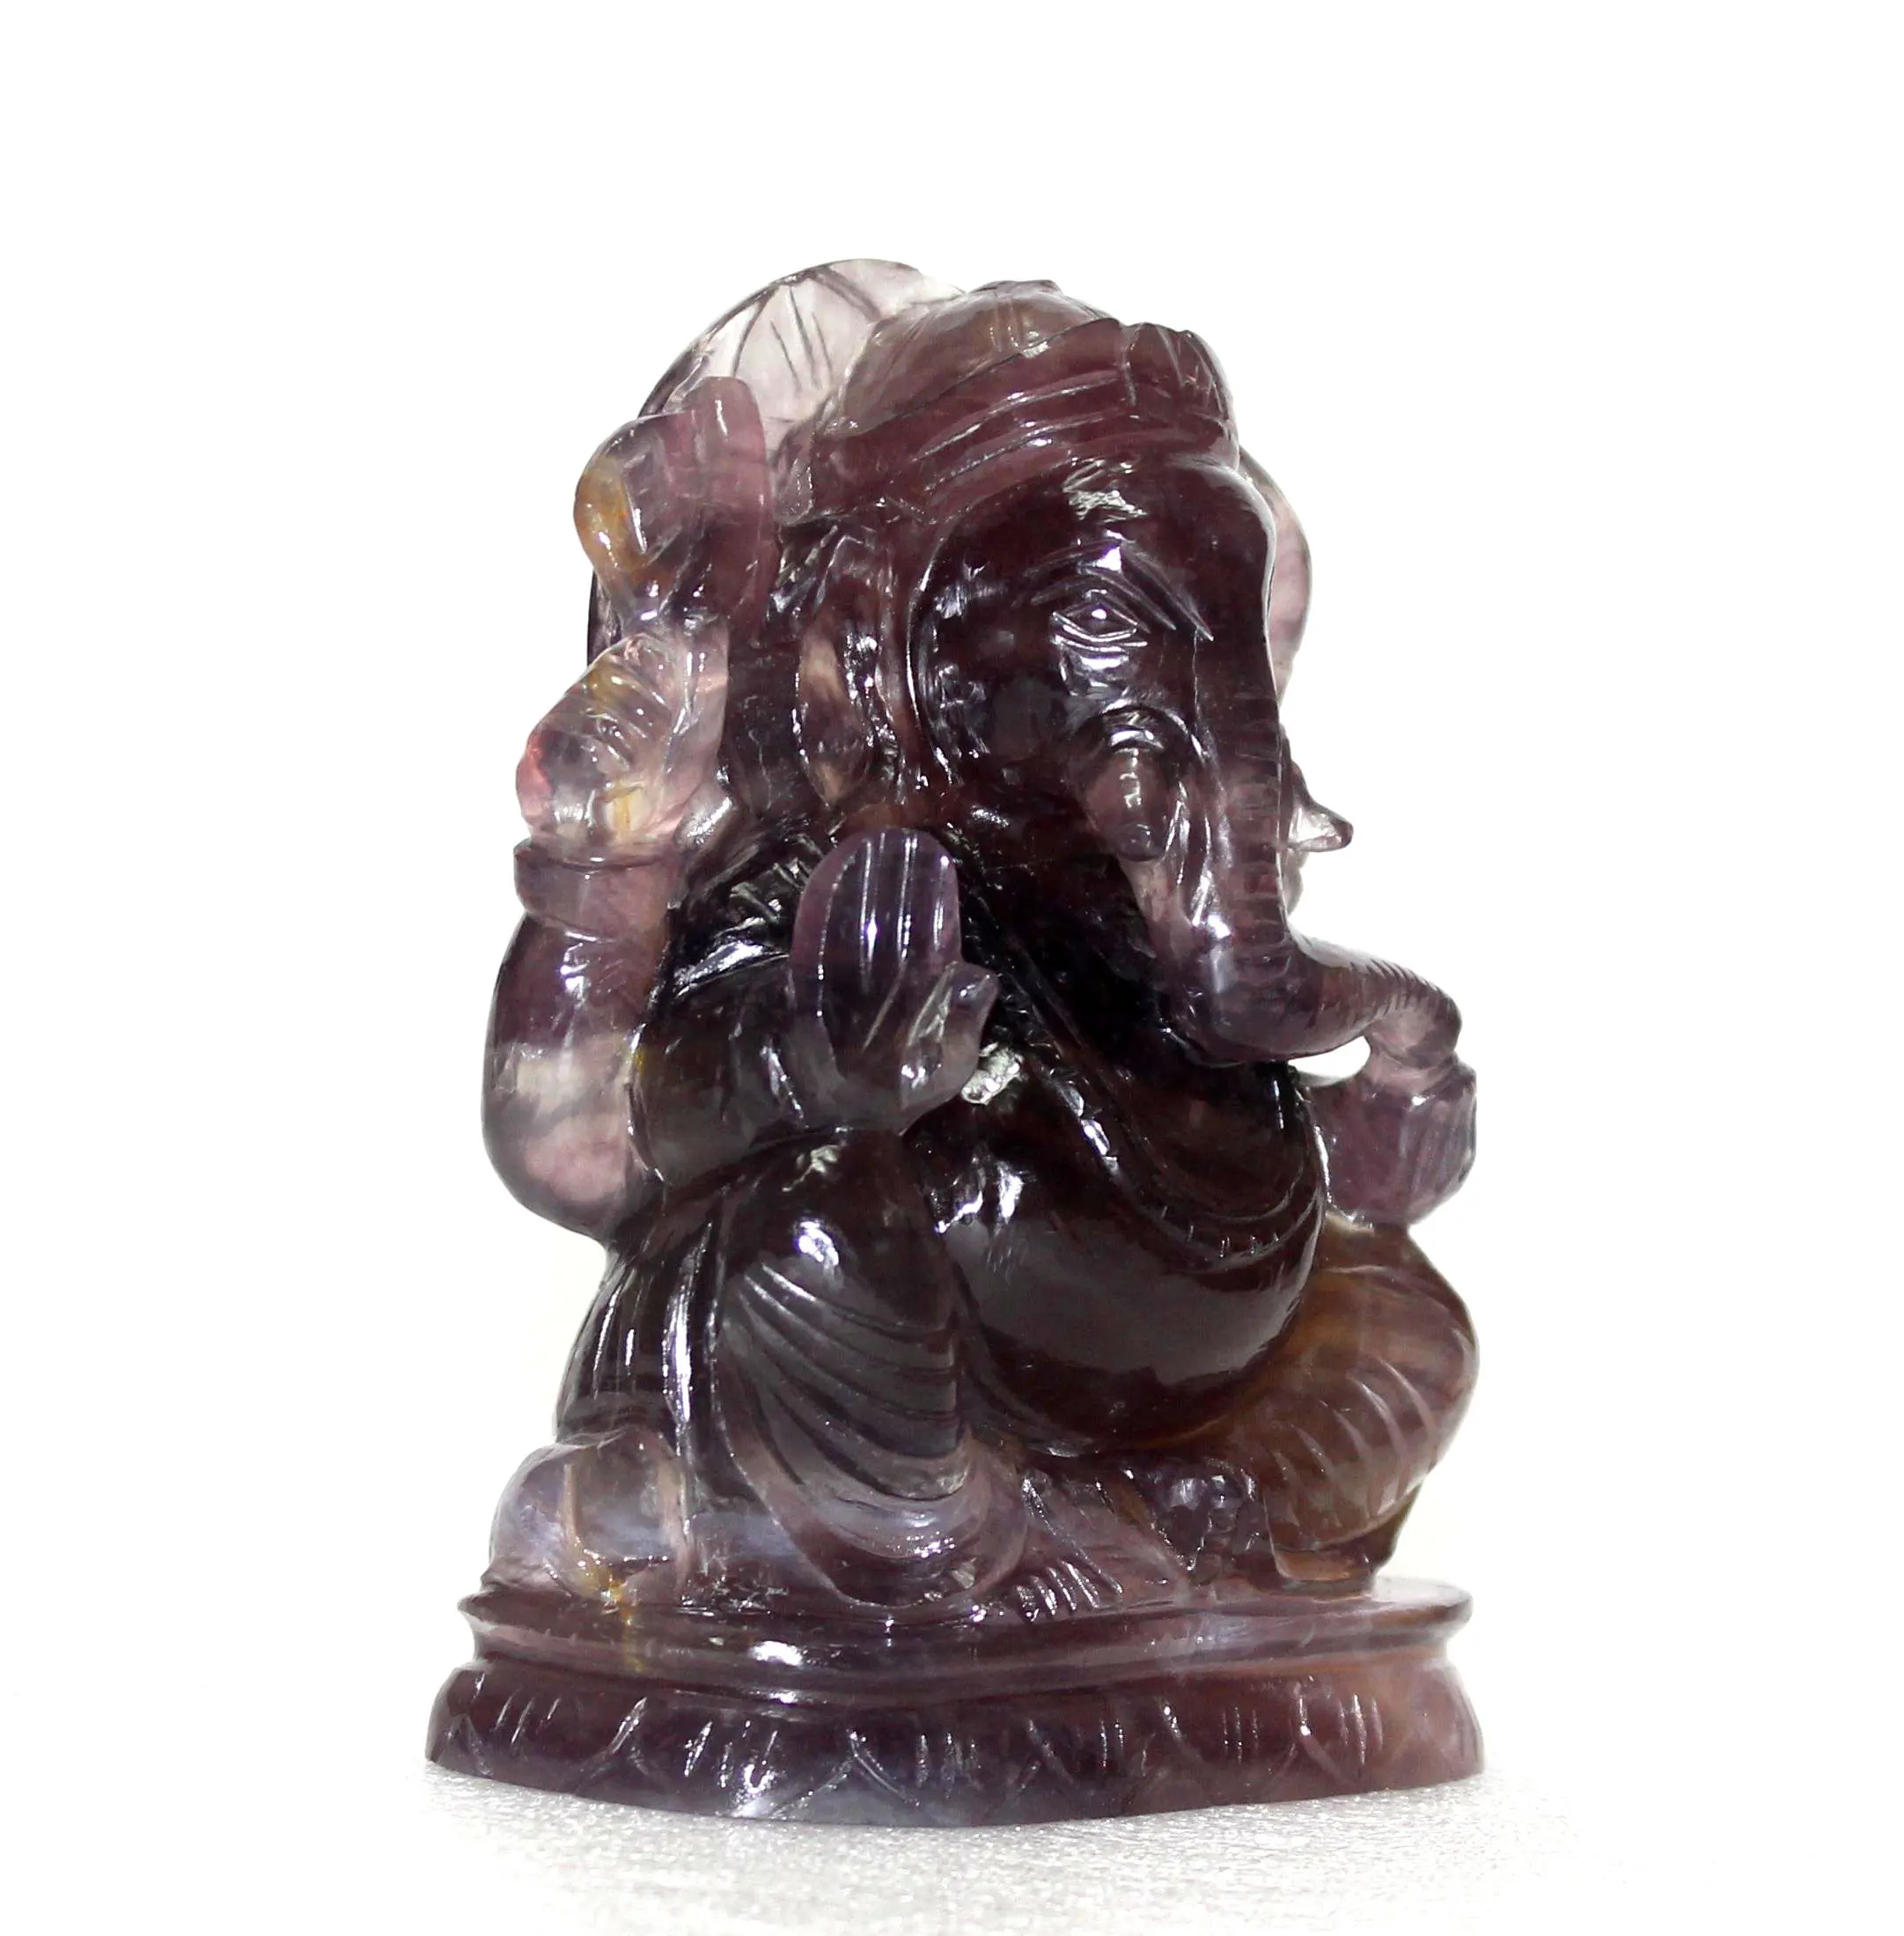 Fluorite Ganesha Stone Sculpture Handcrafted Carving Figurine Piedras Naturales Healing Crystal Stone